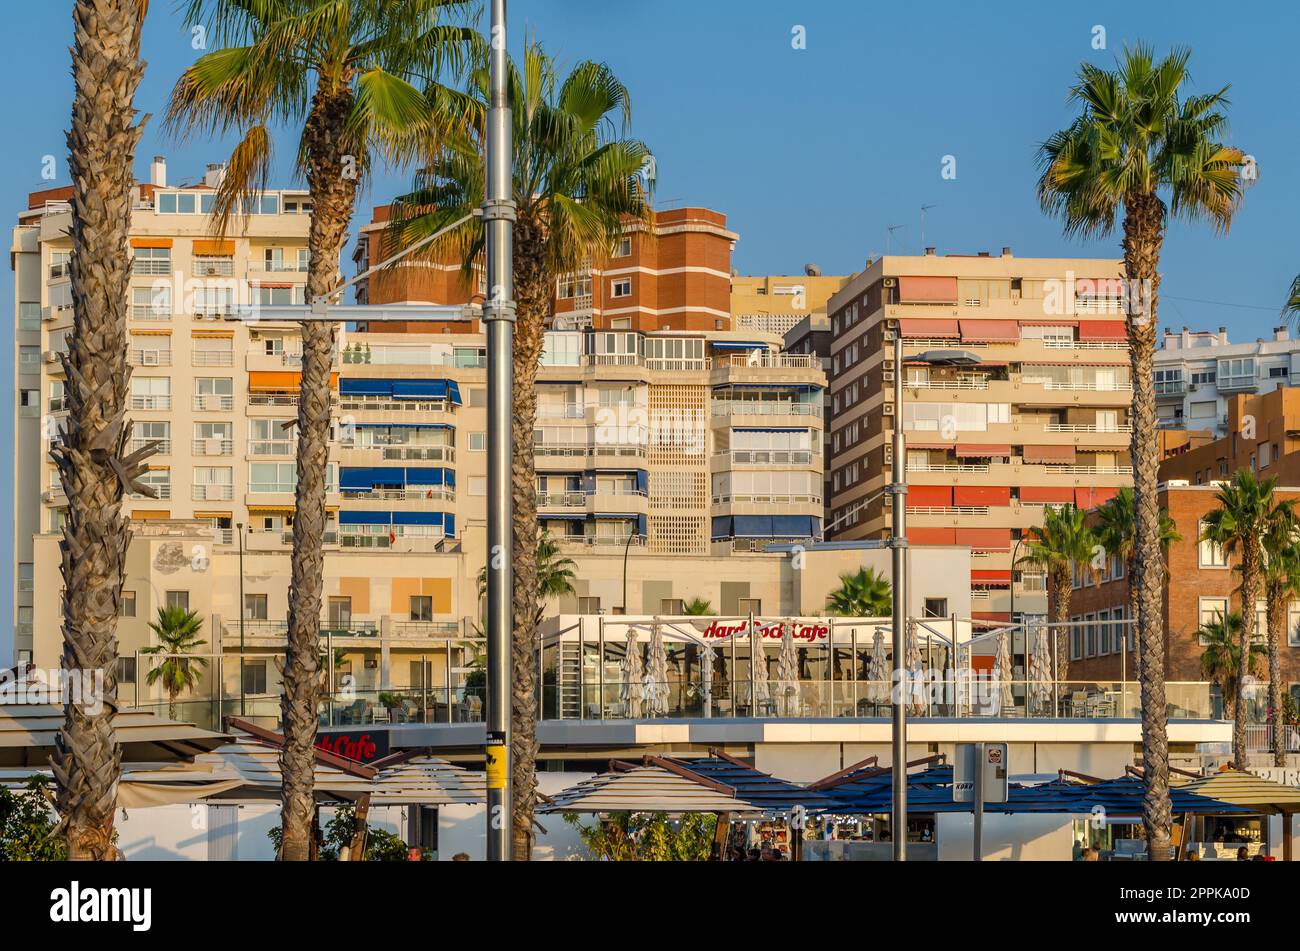 MALAGA, SPAIN - OCTOBER 12, 2021: "Muelle Uno", an outdoor shopping area with a variety of modern shops and restaurants along the promenade in Malaga, Spain Stock Photo